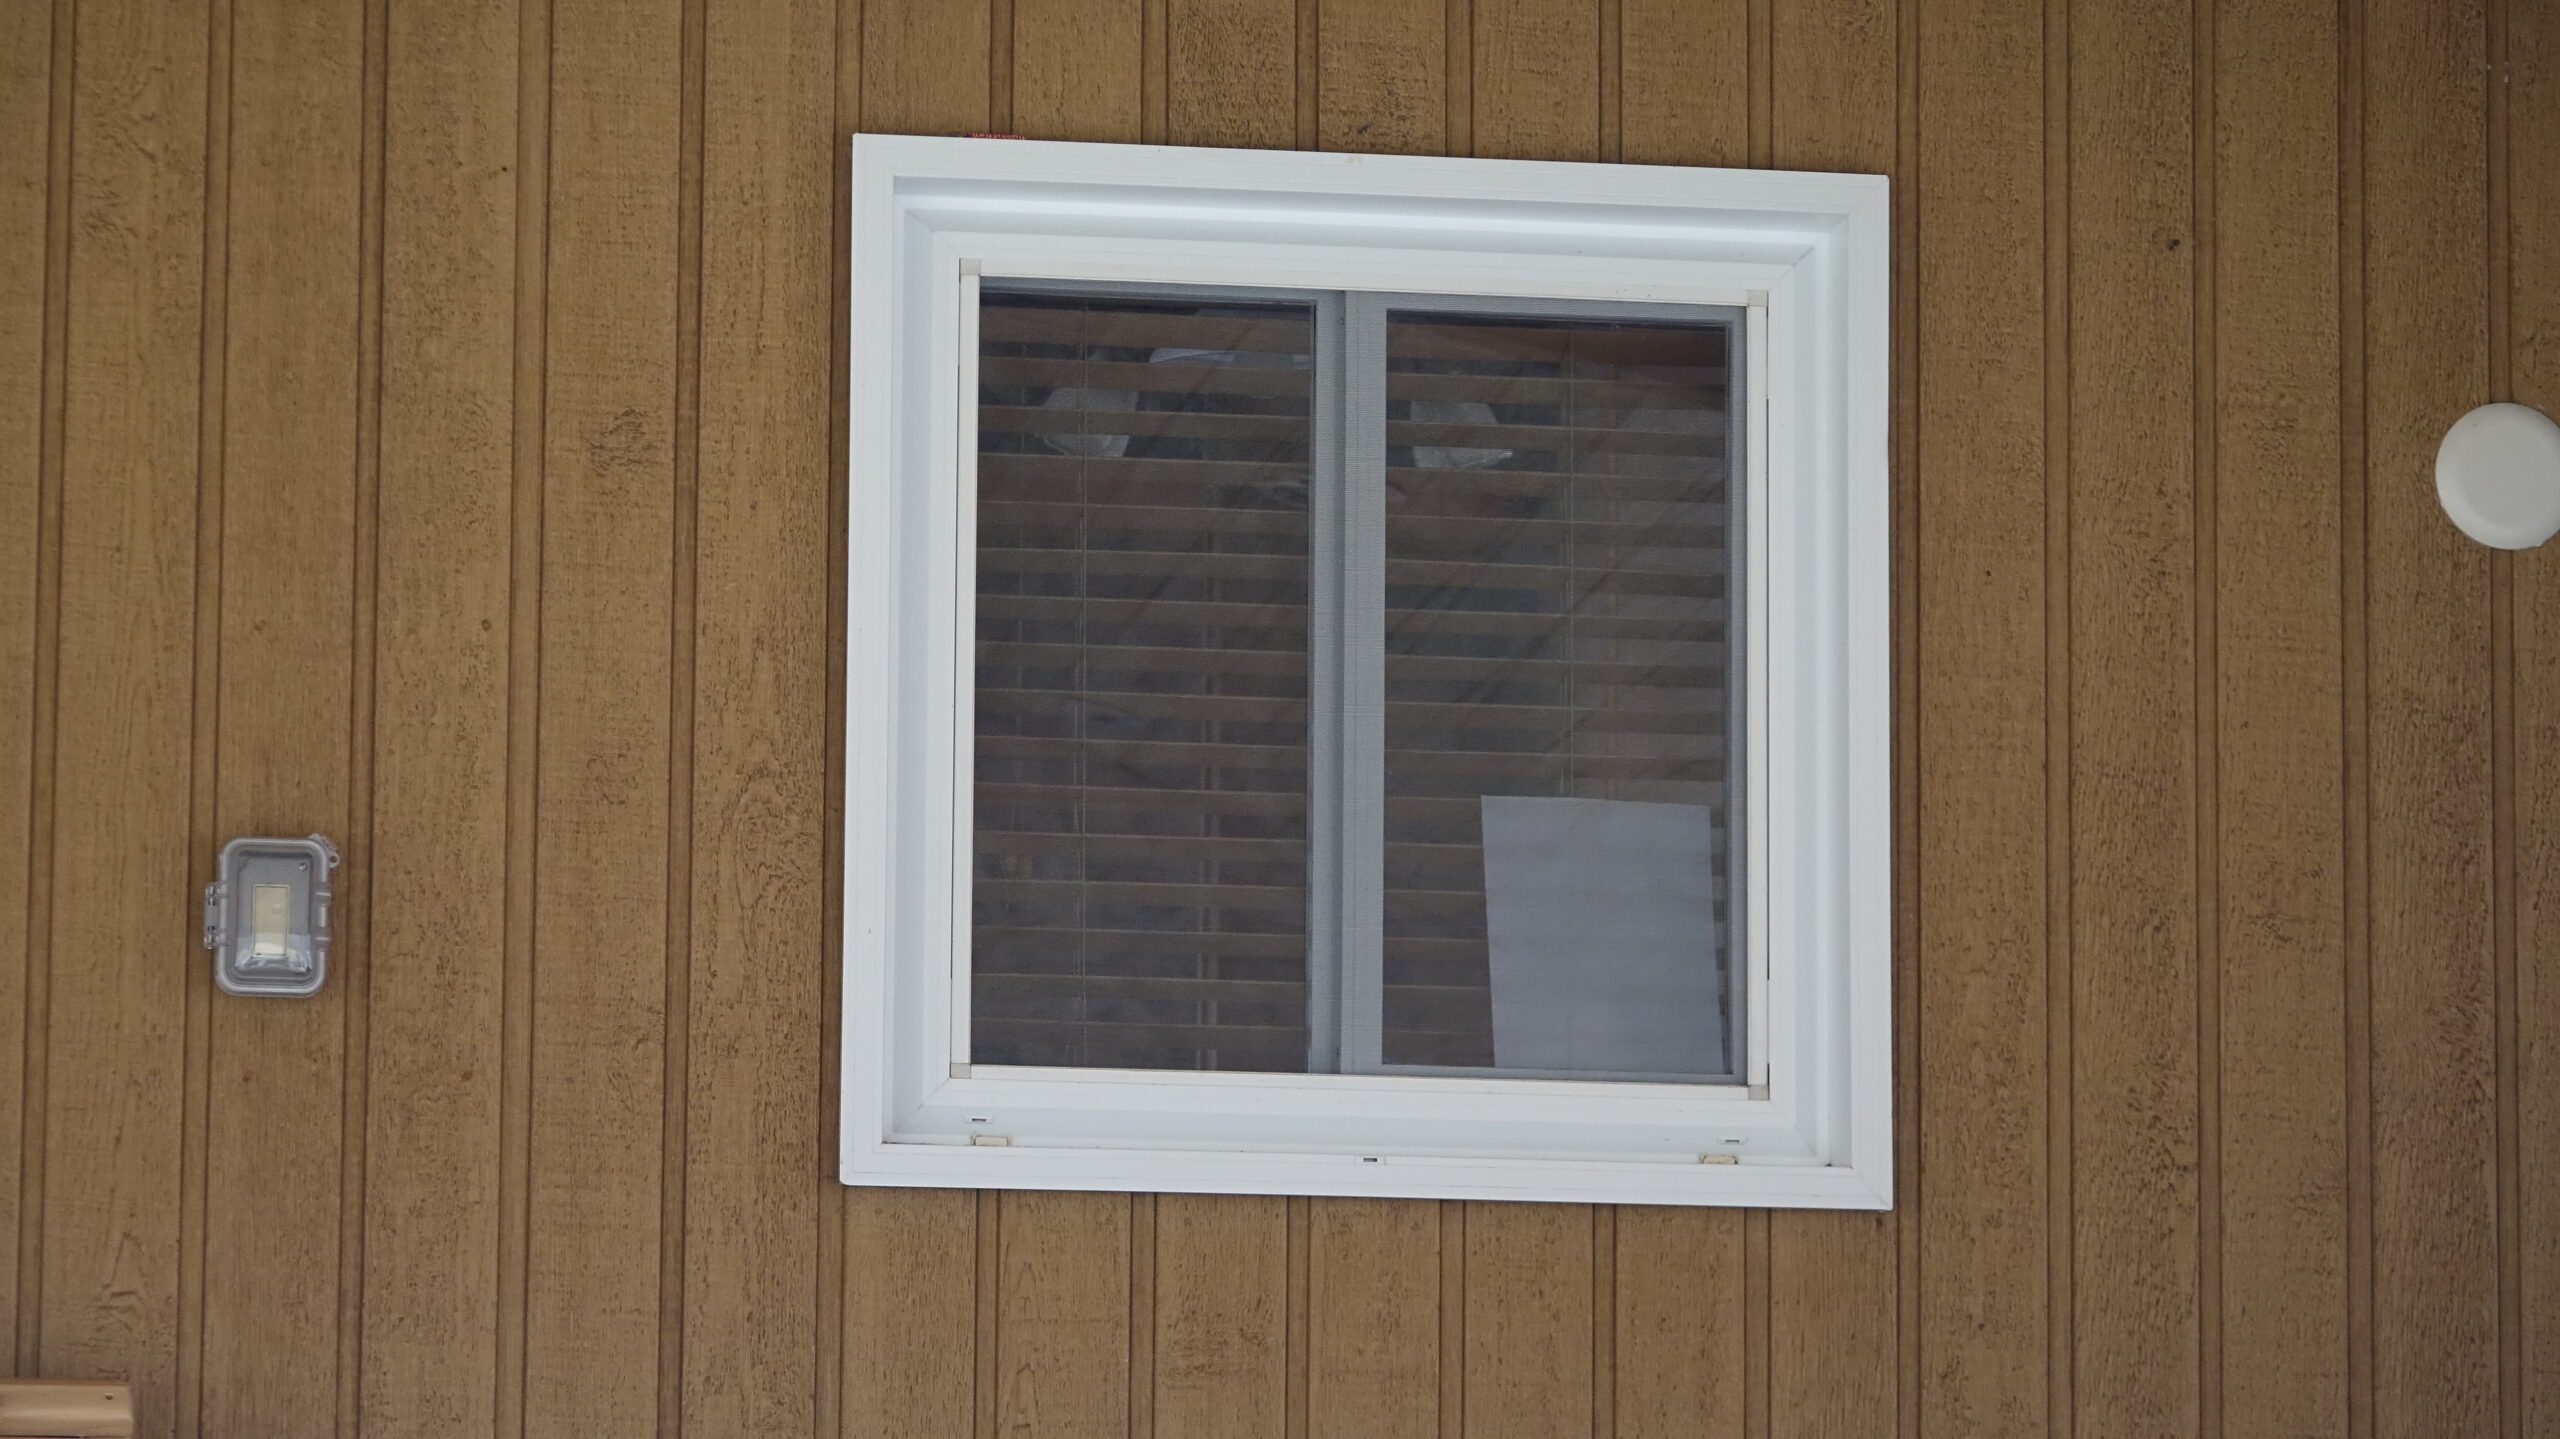 outside view of a window with blinds